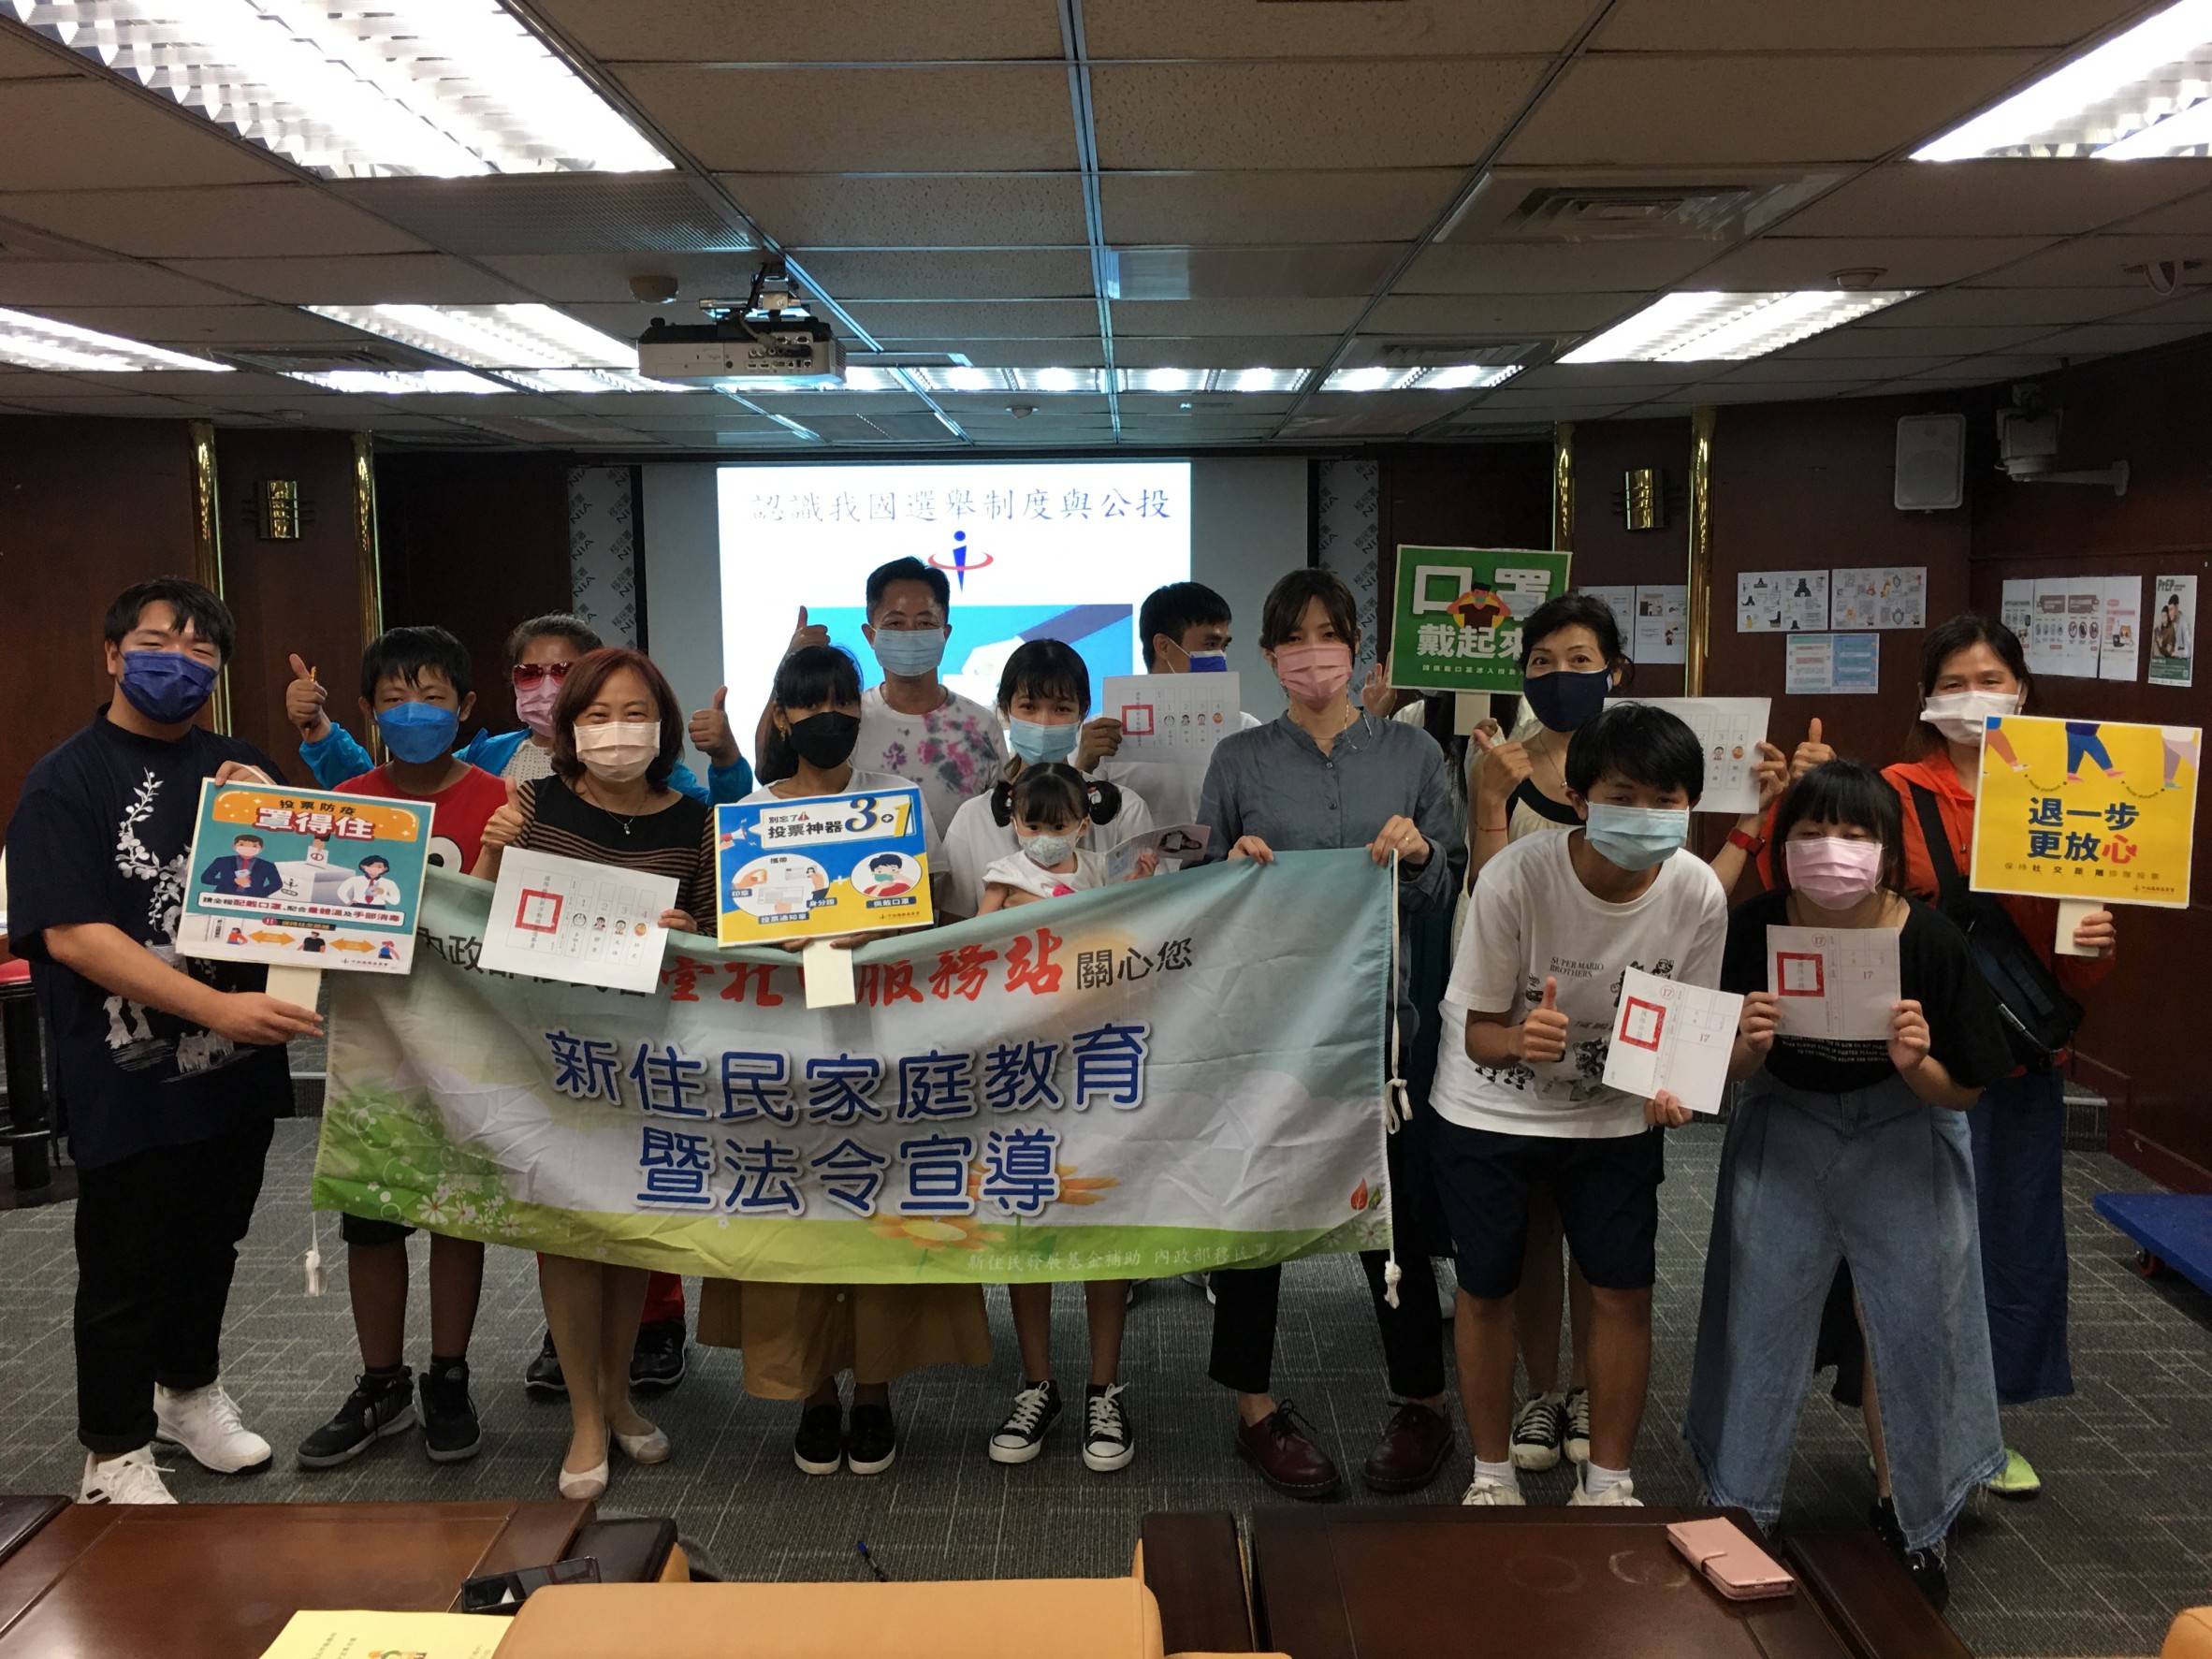 The Taipei City Service Station of the North District Affairs Brigade of the National Immigration Agency handles family education activities for new immigrants and exchanges views on referendum election methods. (Photo/Provided by Taipei City Service Station)